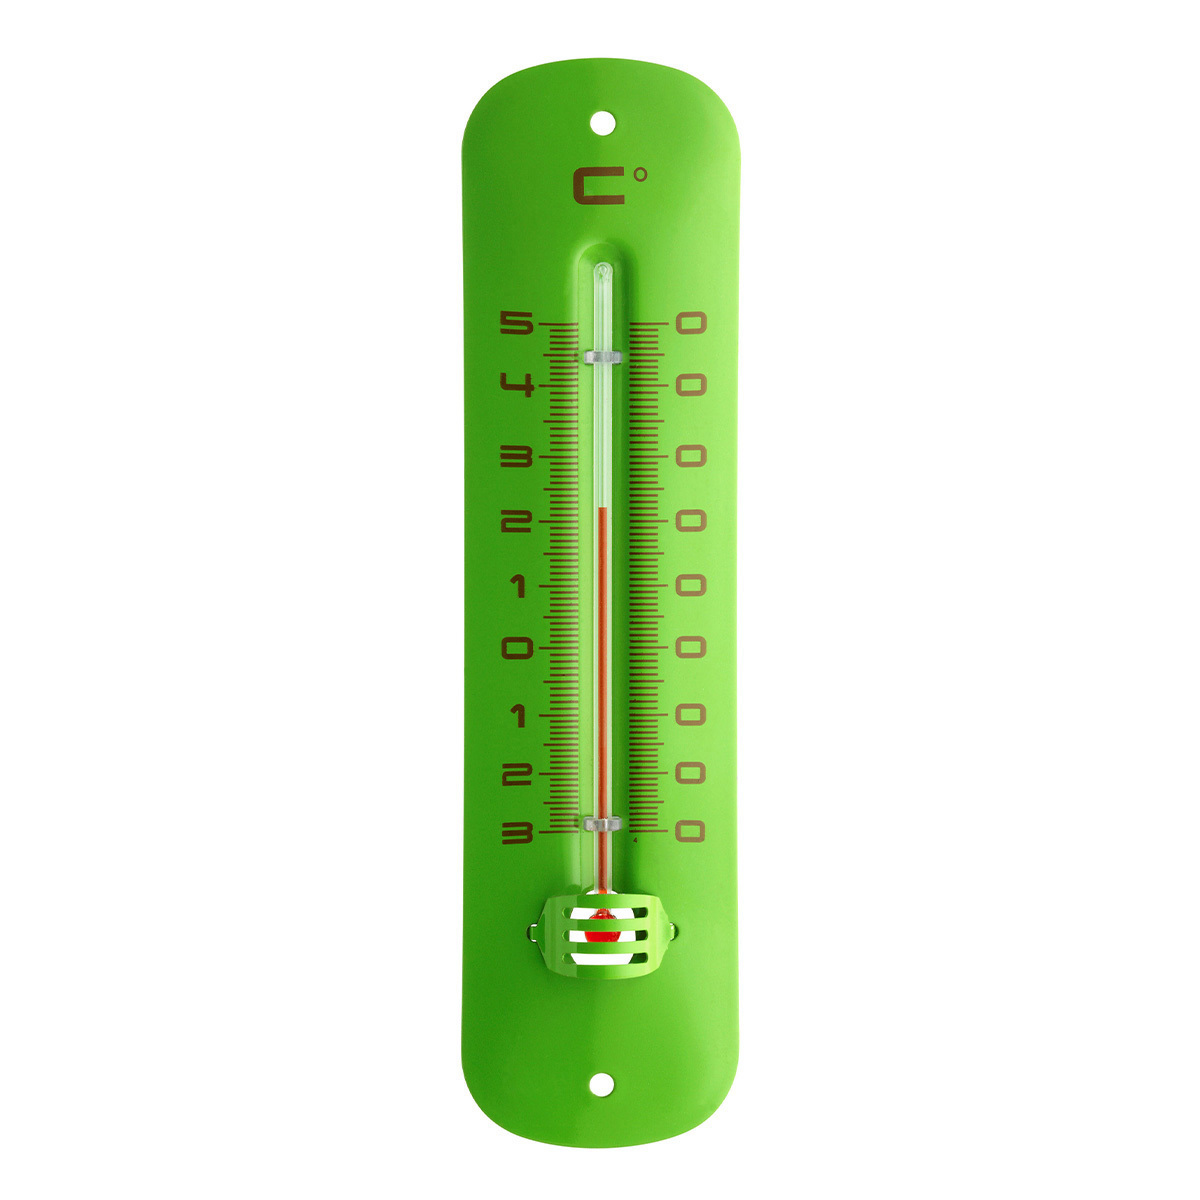 analog thermometer indoor outdoor room garden thermometer